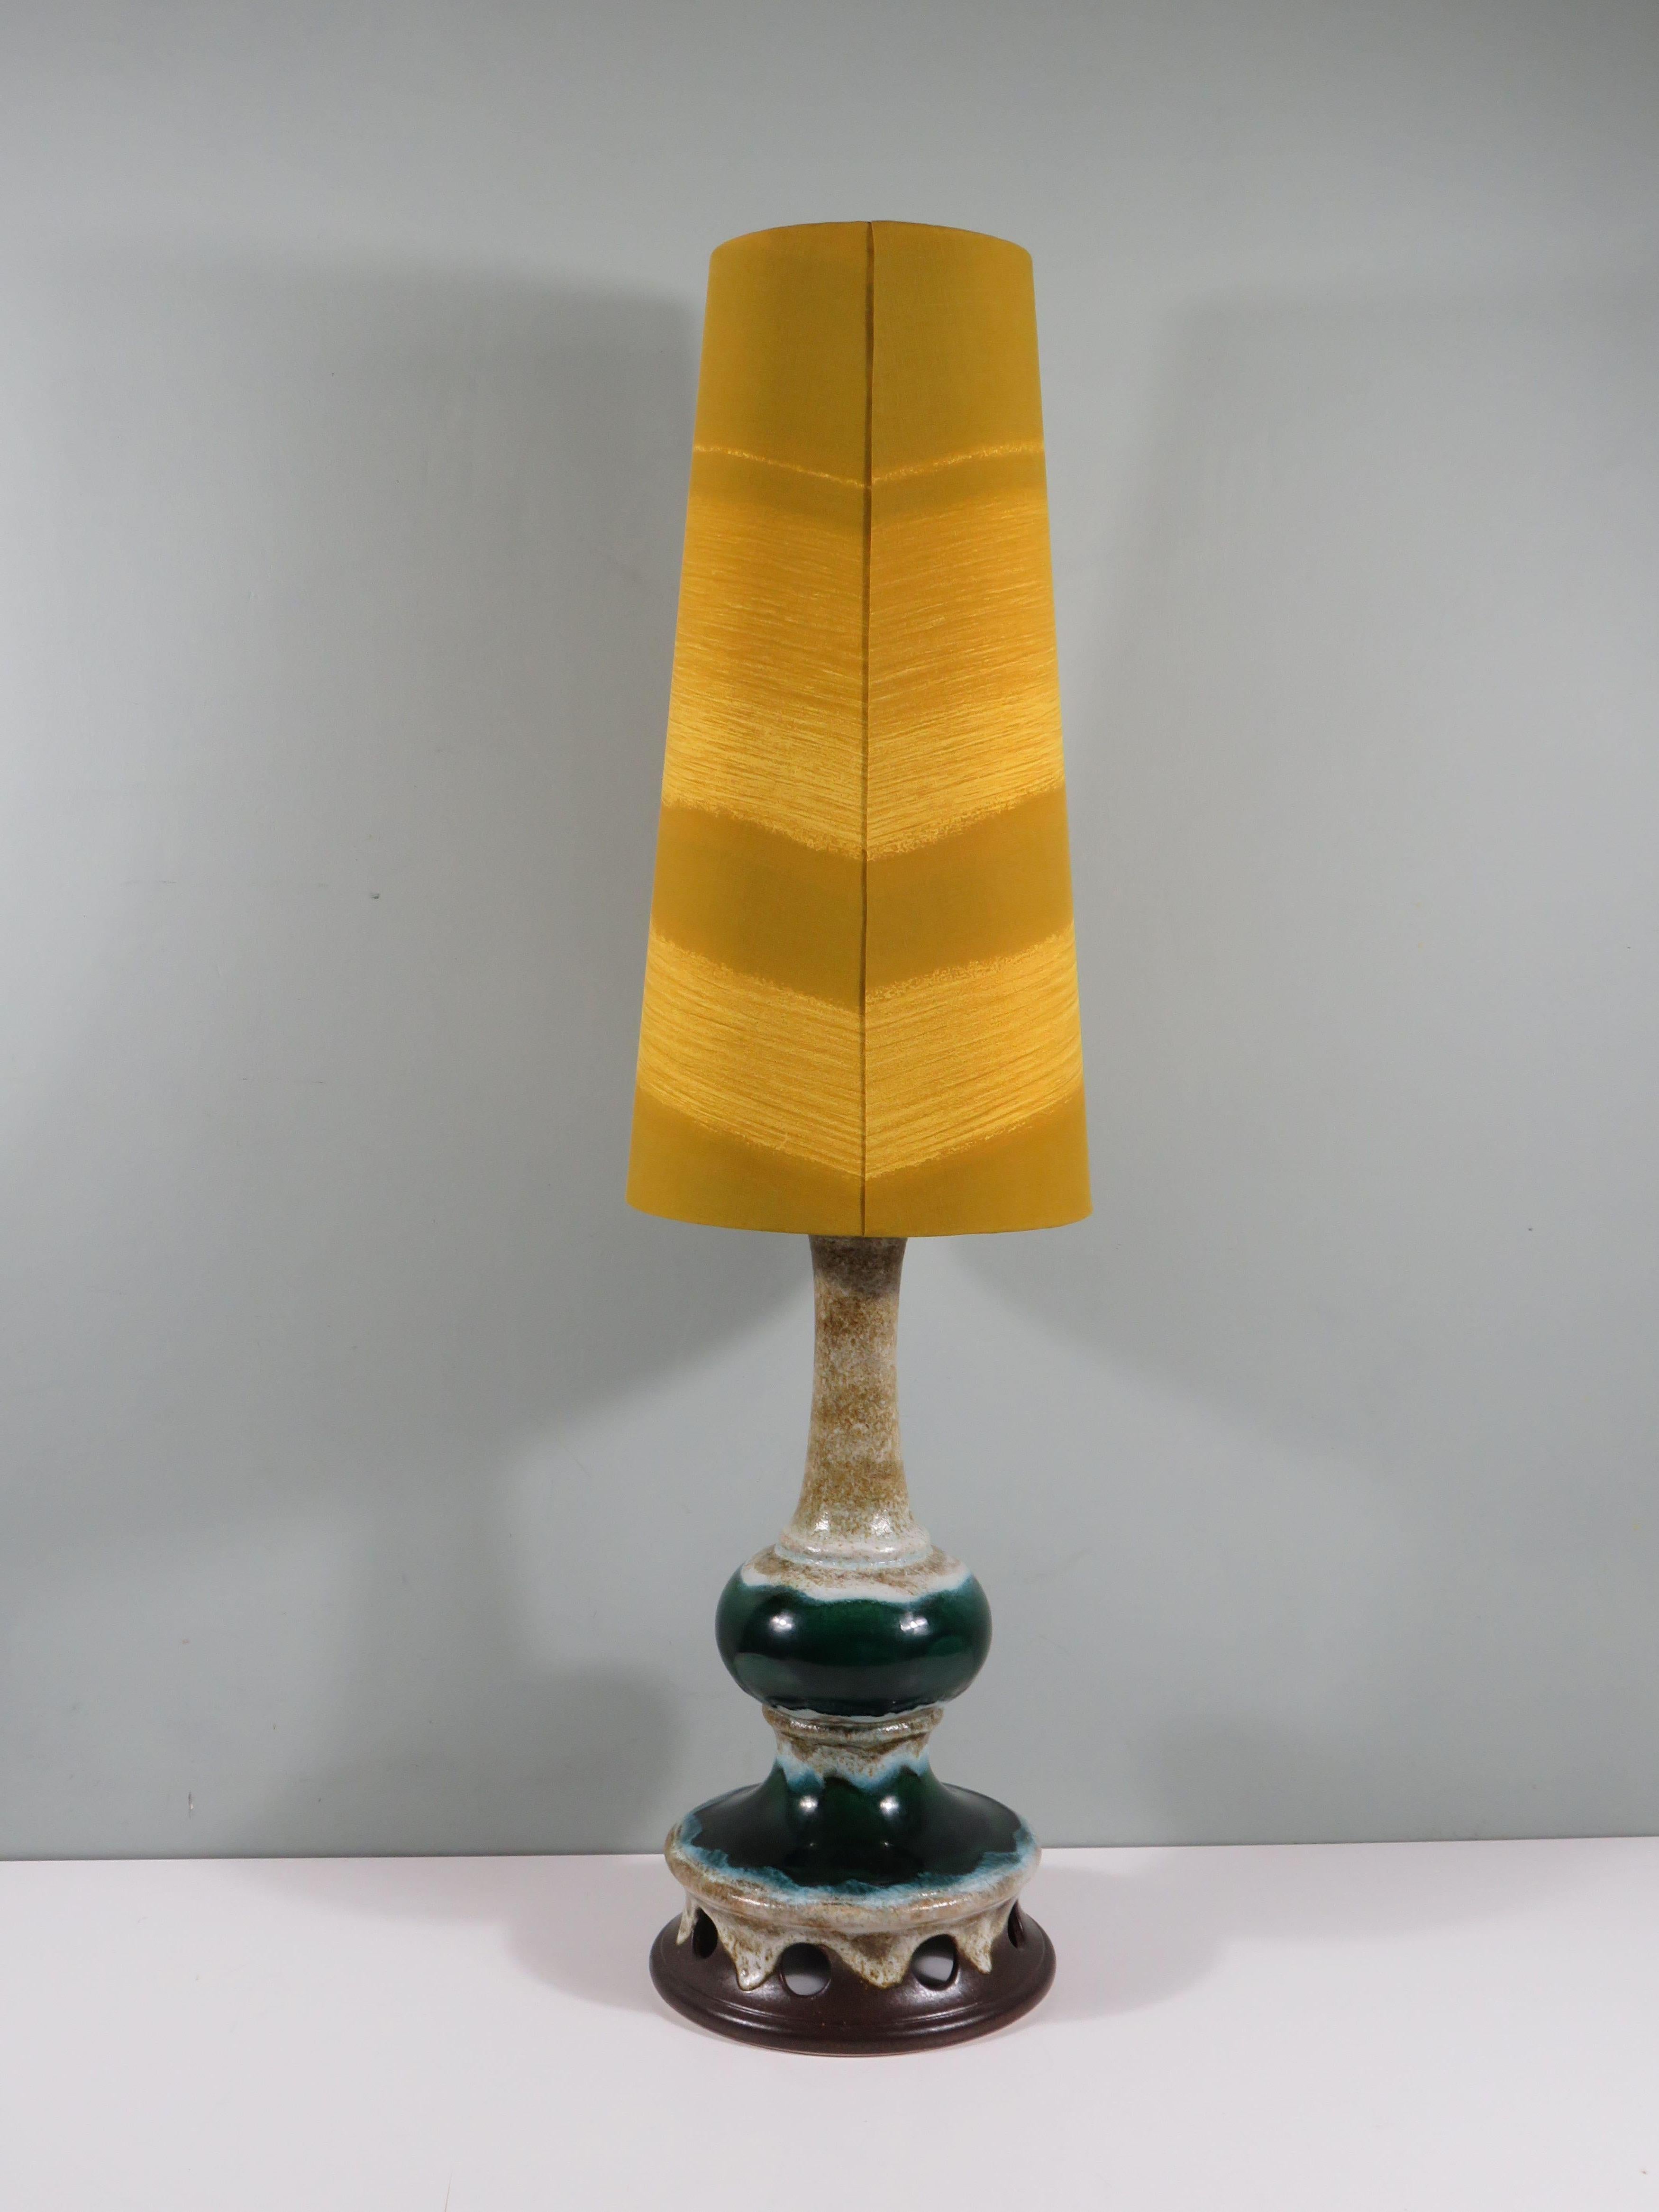 This beautiful floor lamp in warm natural tones can become the new eye-catcher in your interior.
The beautiful green, brown and beige tones of the ceramic lamp base are in harmony with the ocher yellow, new, custom-made conical lampshade.
The lamp